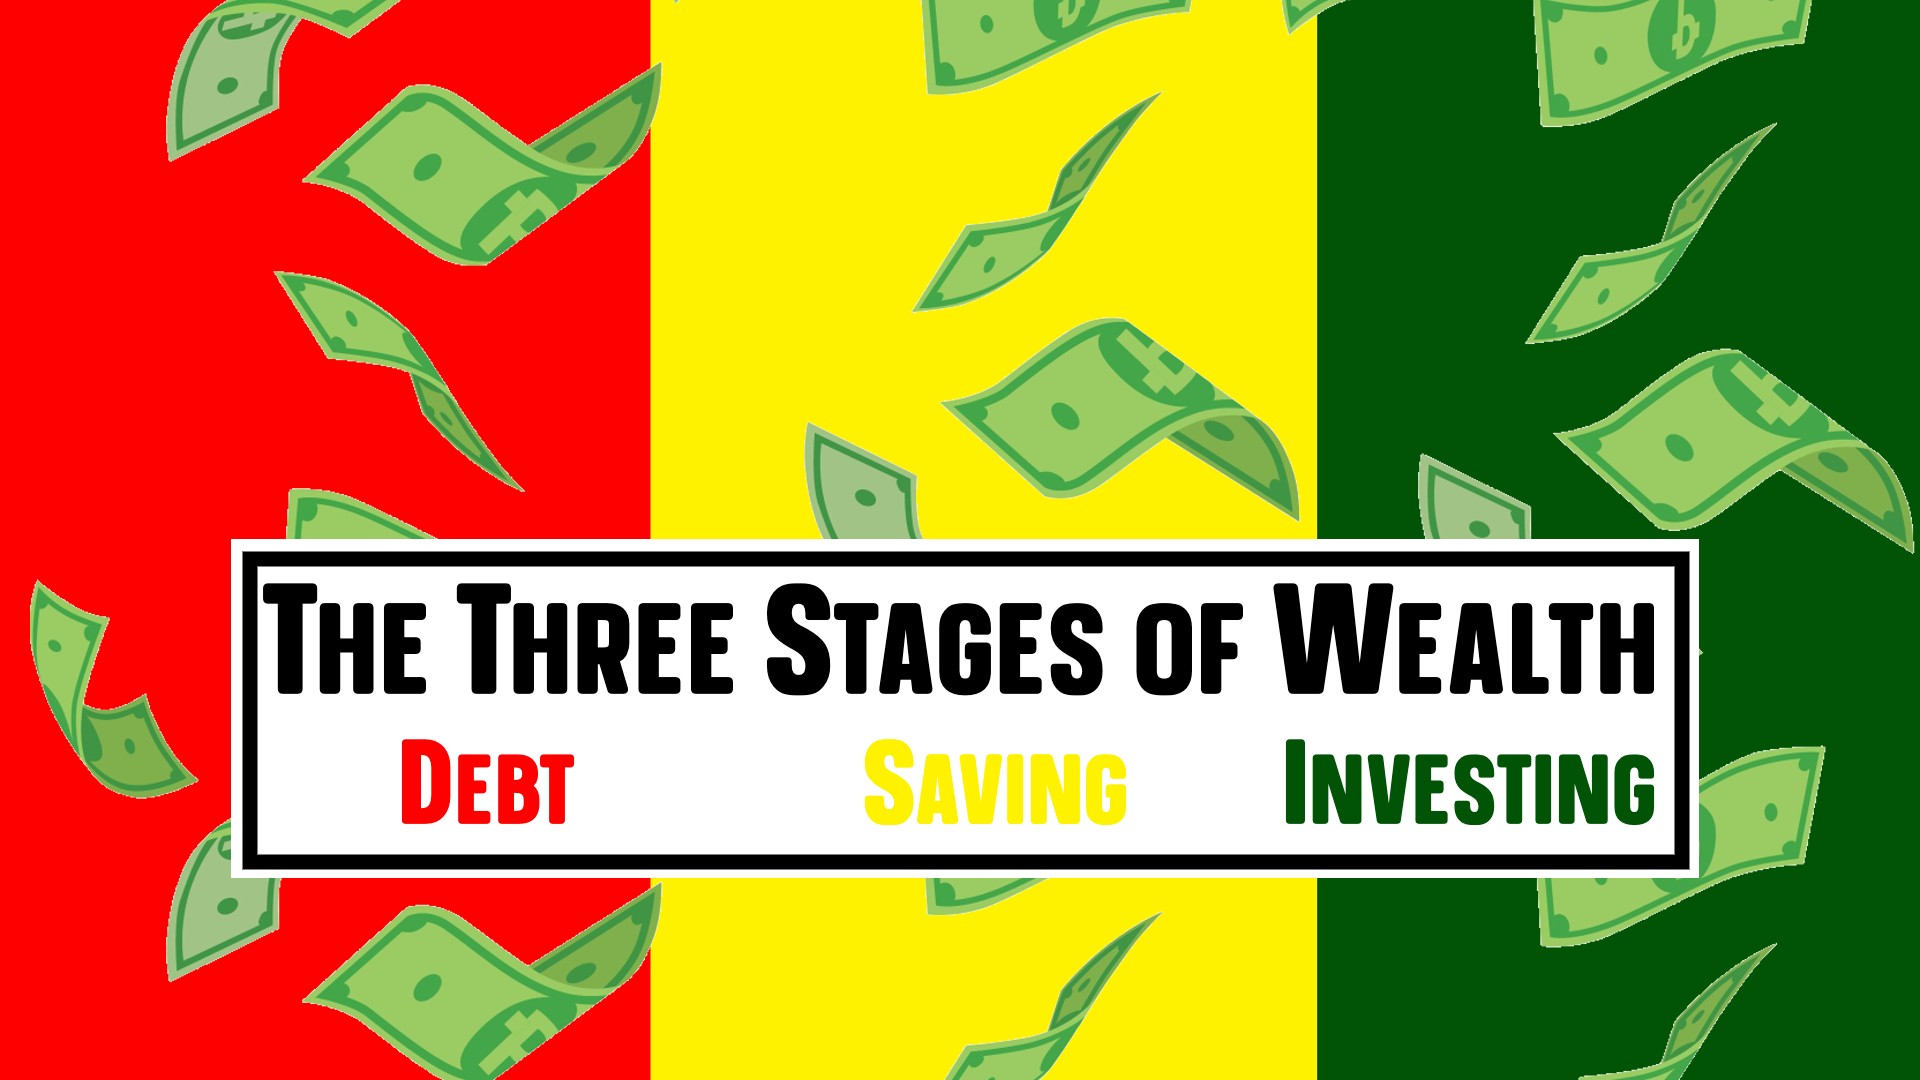 The Three Stages of Wealth: Debt, Saving, Investing